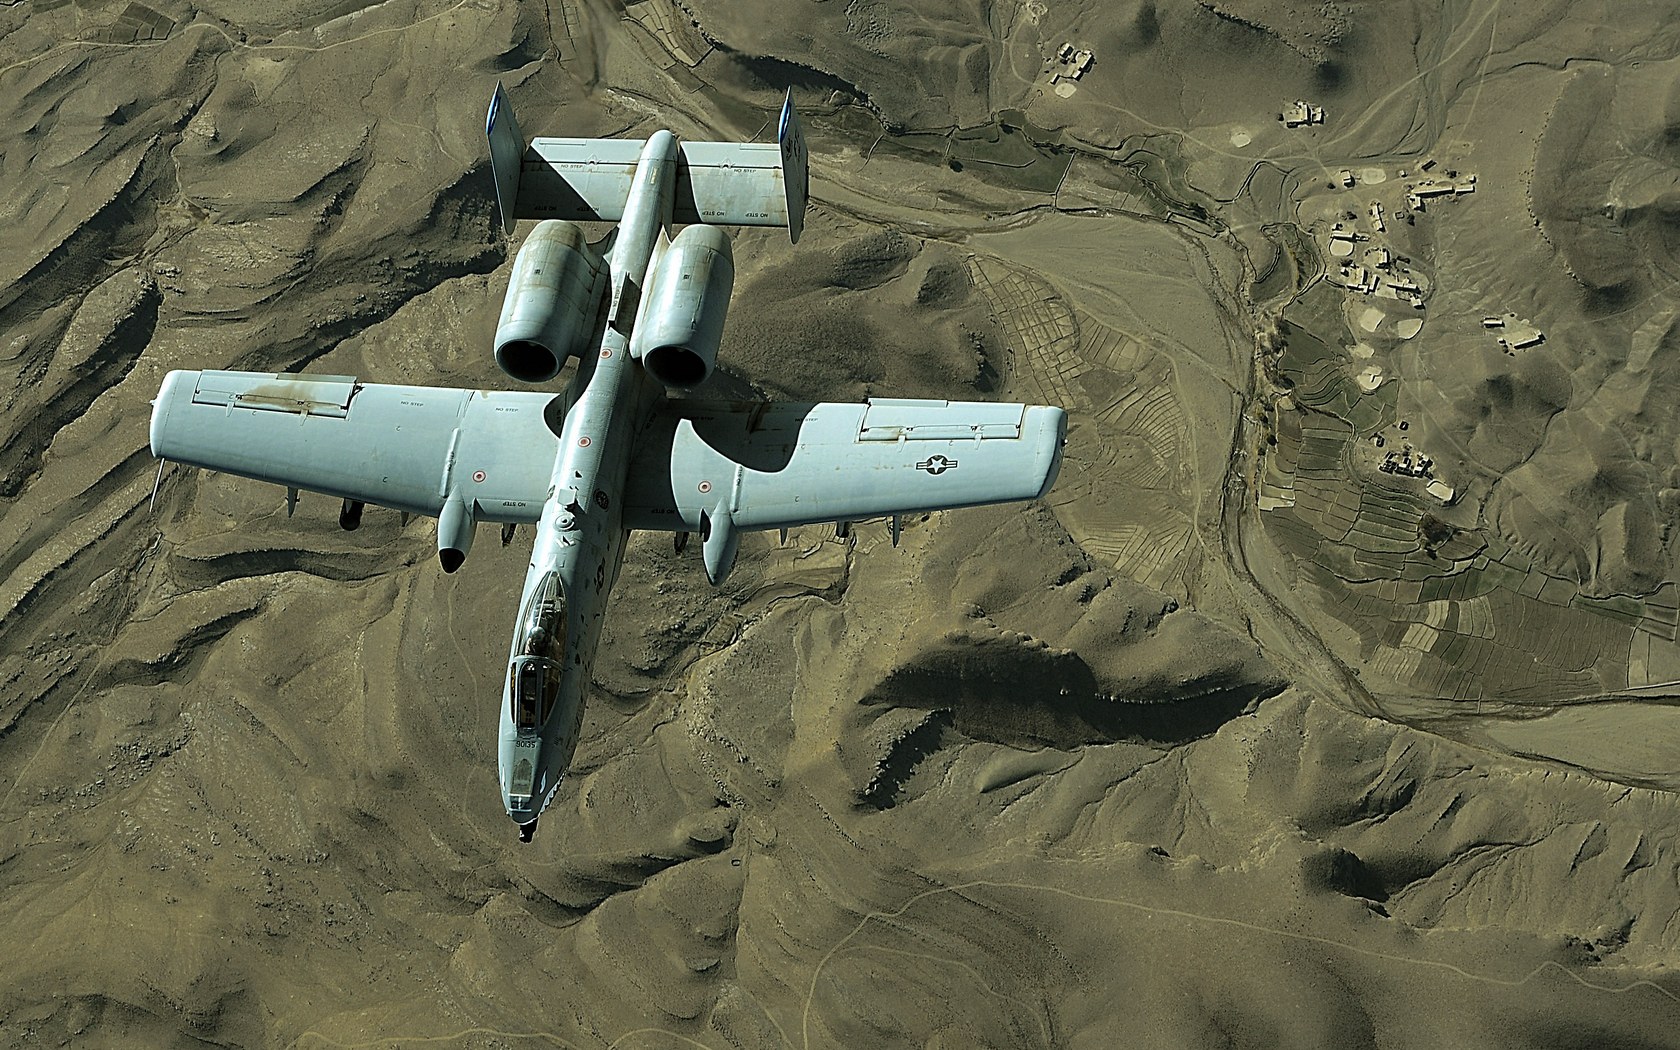 Download full size A-10 Thunderbolt Military Airplanes wallpaper / 1680x1050